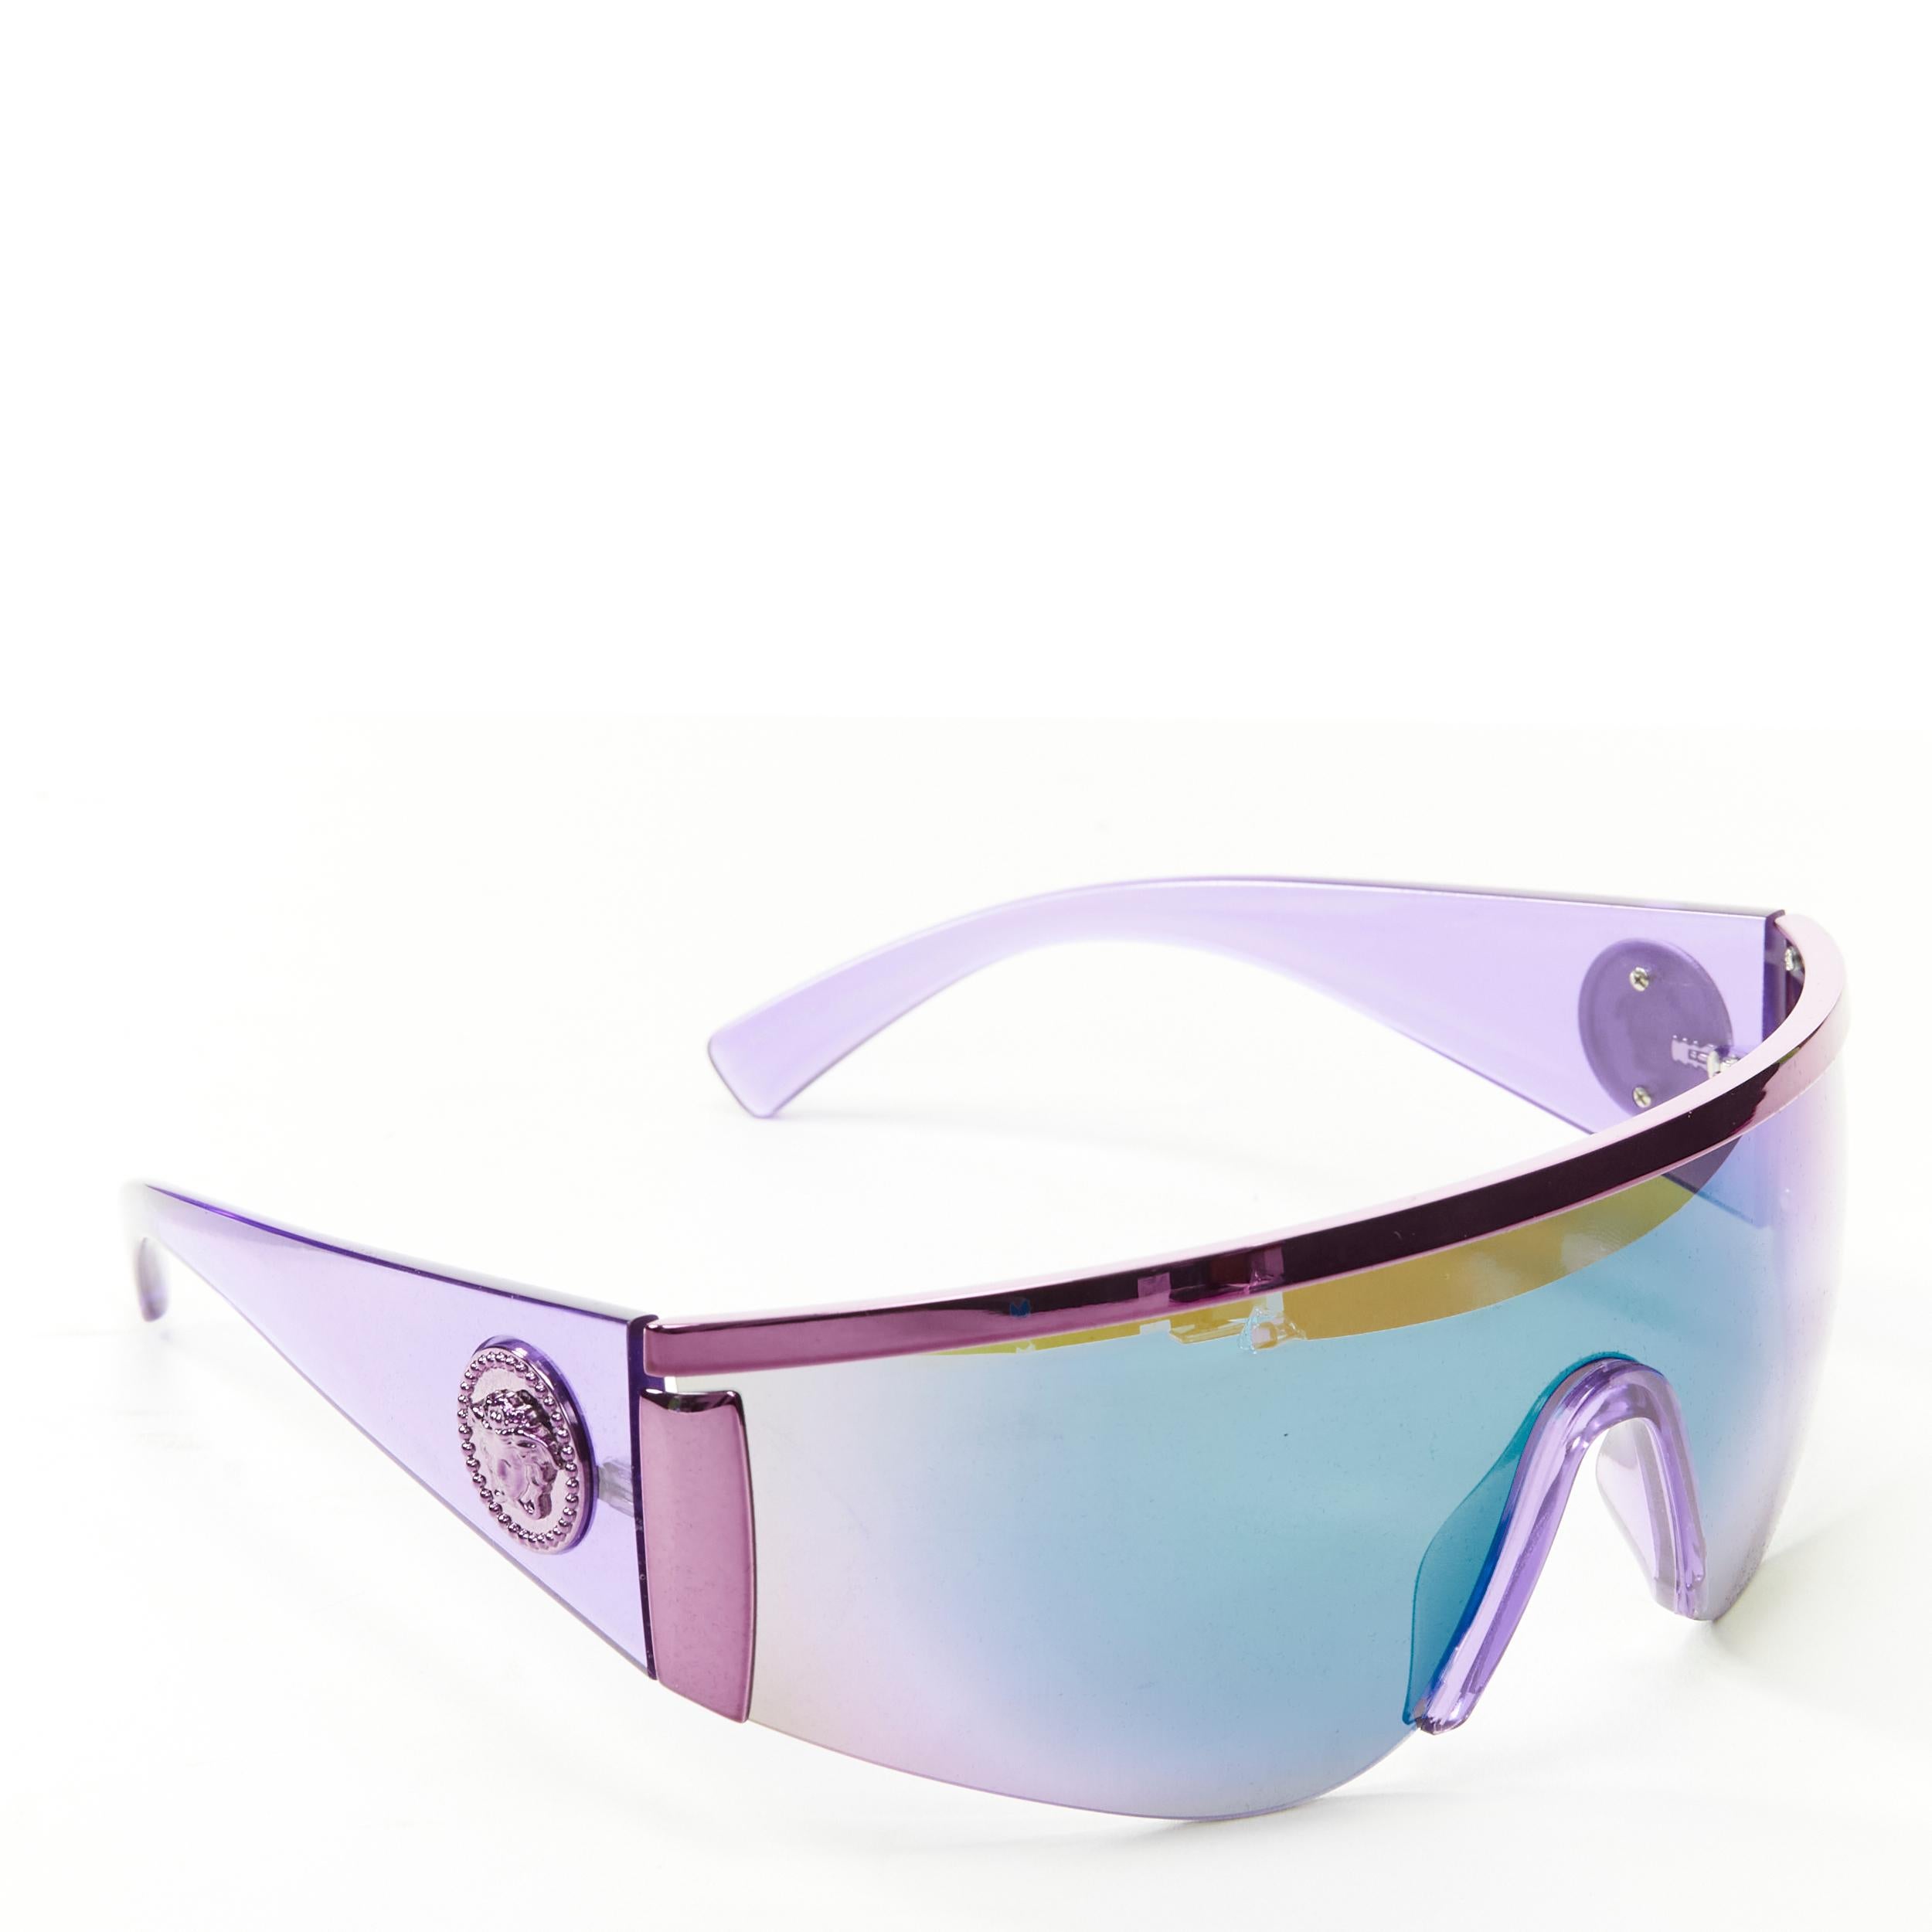 new VERSACE 2018 Tribute VE2197 Medusa purple blue mirrored shield sunglasses Reference: TGAS/C00246
Brand: Versace 
Designer: Donatella Versace 
Collection: Tribute 
Material: Metal 
Color: Purple 
Pattern: Solid 
Extra Detail: From the 2018